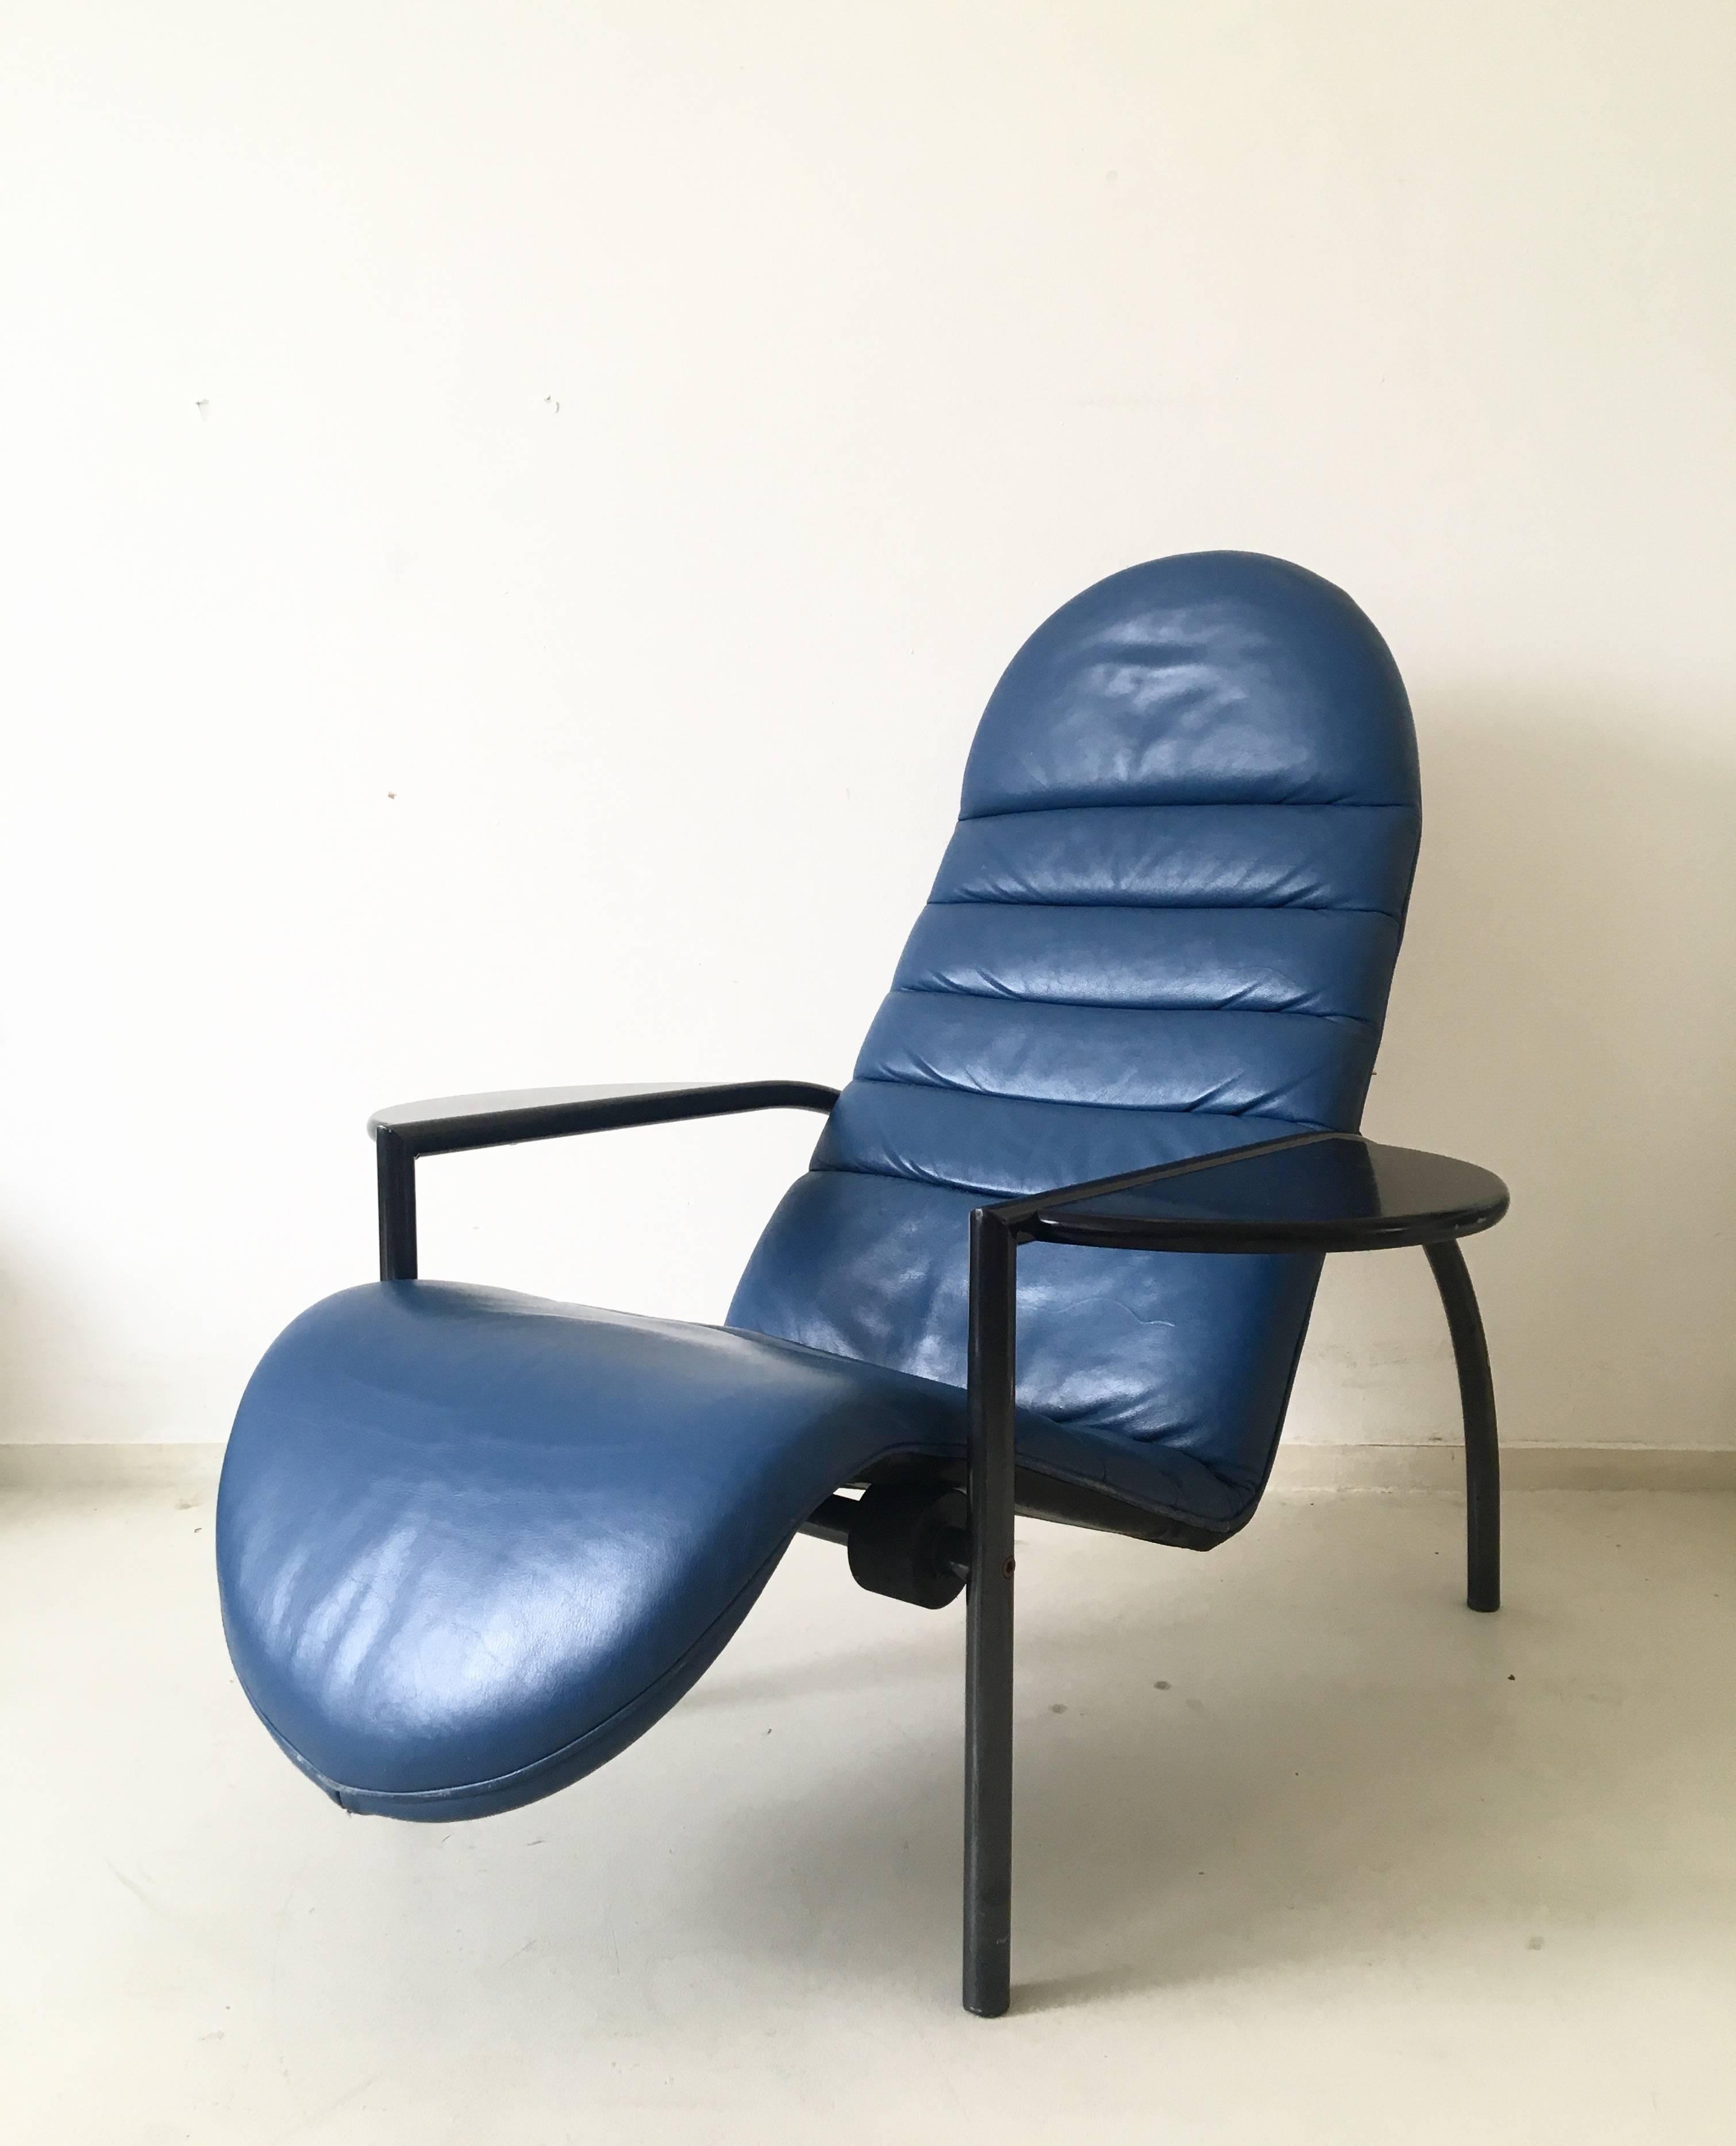 Extremely hard to find, is this so called 'Noe' chair by Moroso. (Confirmed by the Moroso team).

The chair features a metal frame with a blue leather seat and armrests in wood that can function easily as tables.

Thanks to a simple, yet functional